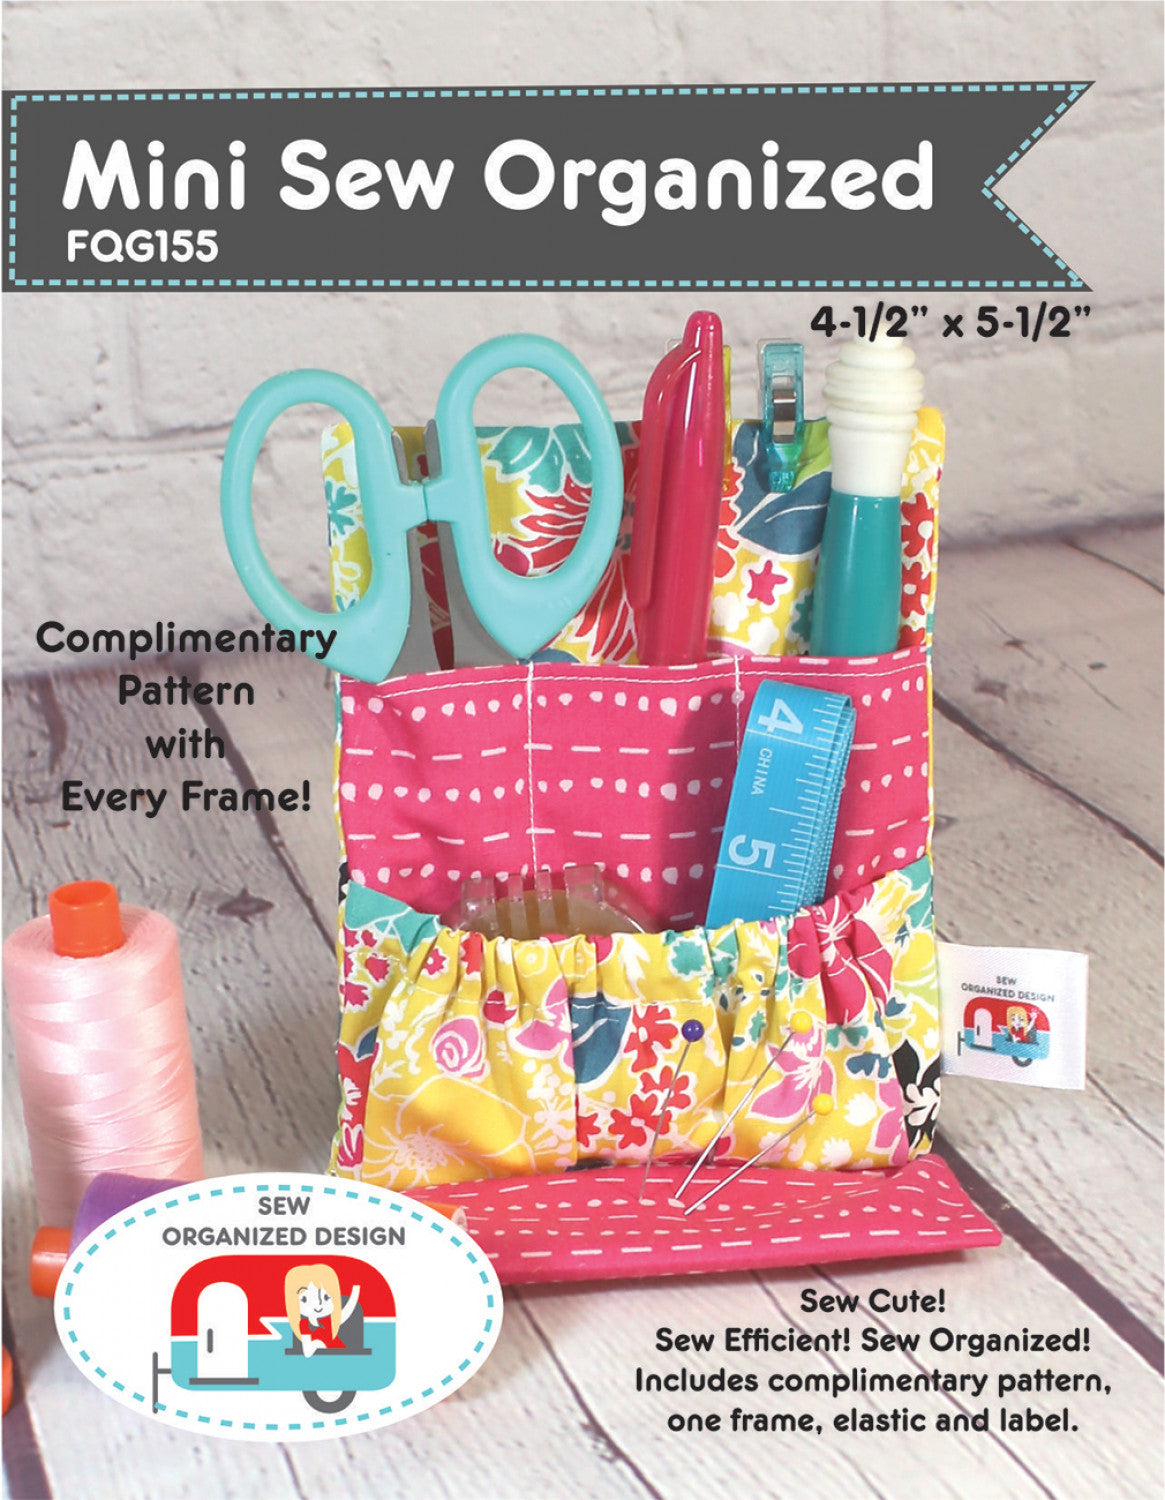 Mini Sew Organized Storage Stand Sewing Pattern and Frame Kit by Joanne Hillestad for Sew Organized Design